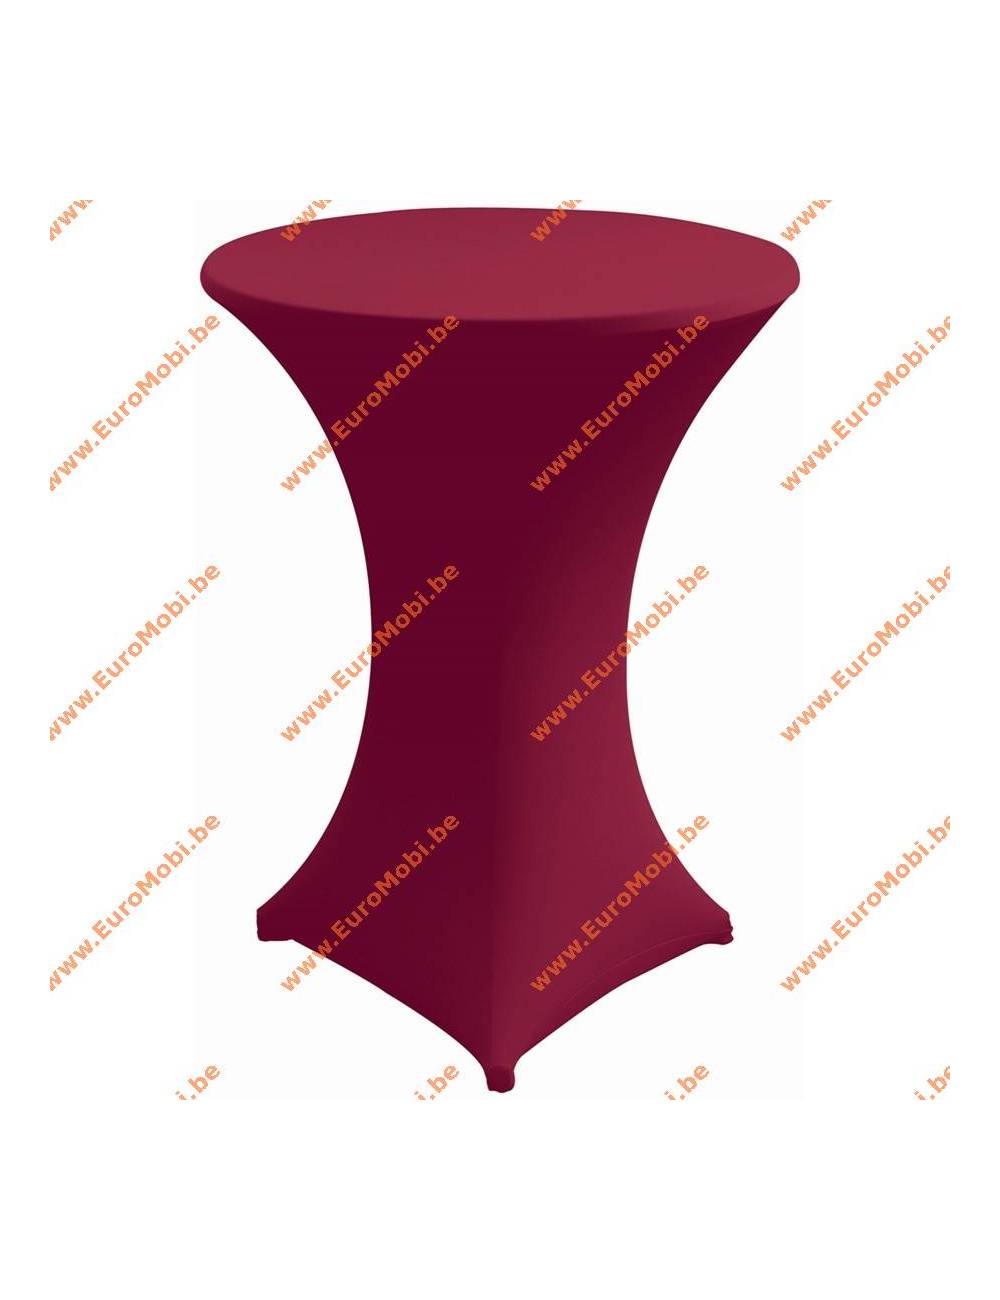 Cover and top stretch for standing table round red dark 